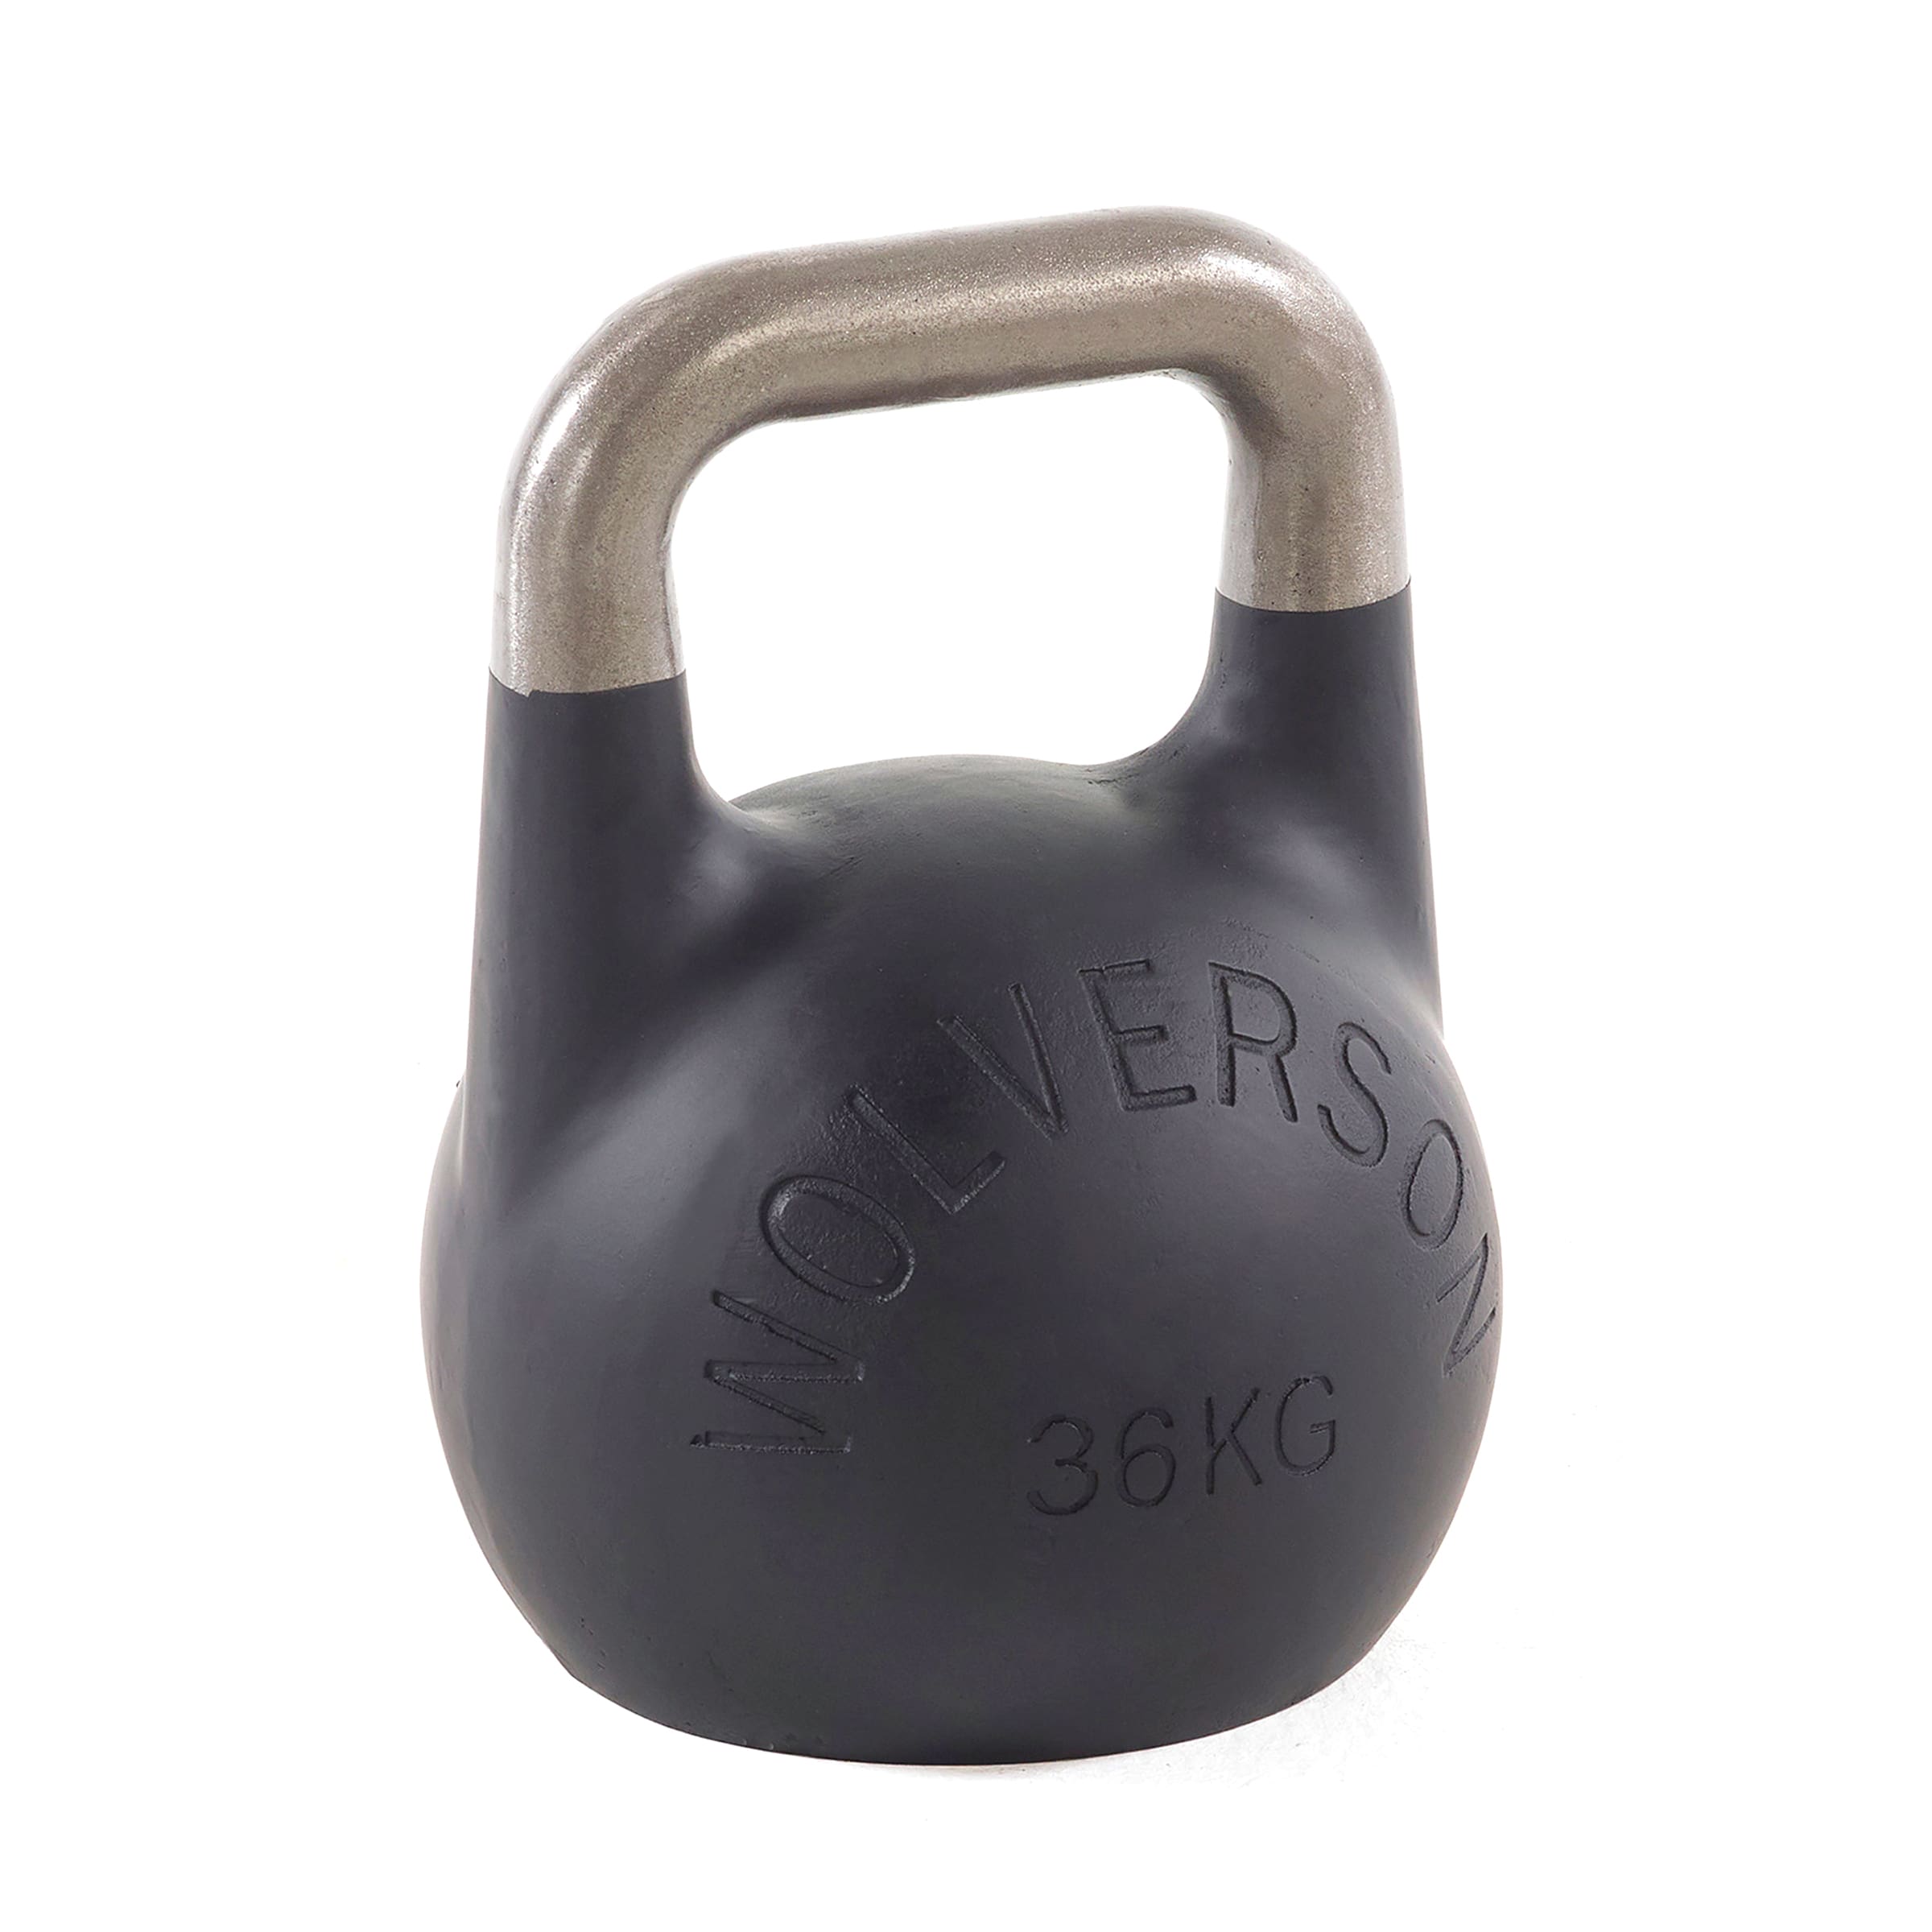 Wolverson Heavy Competition Kettlebells